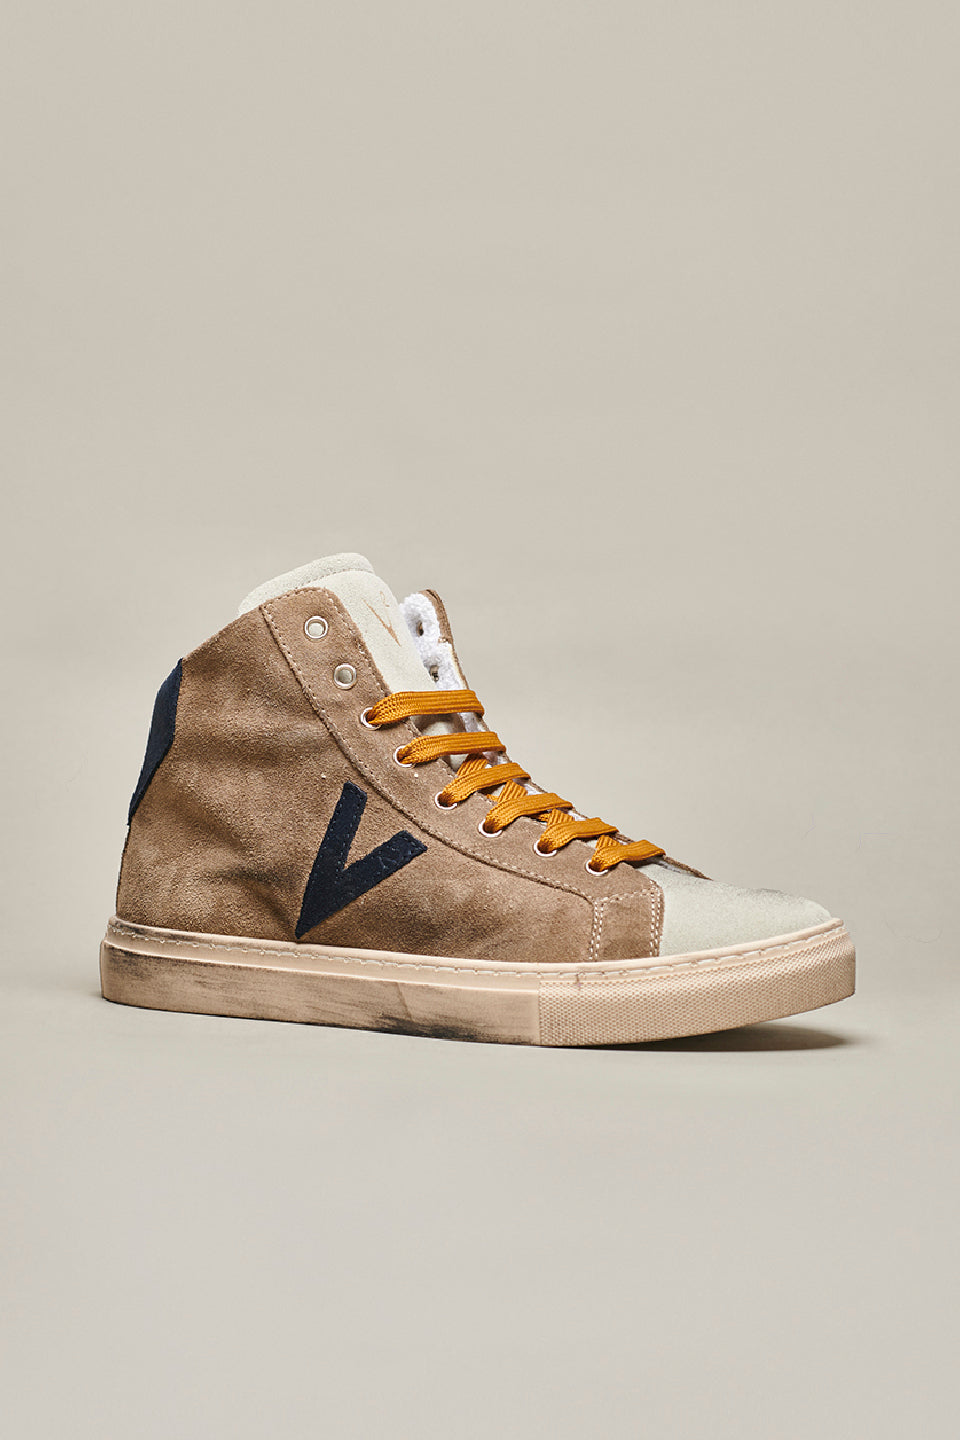 OLYMPIC MID - Moro high sneakers with blue back and insert